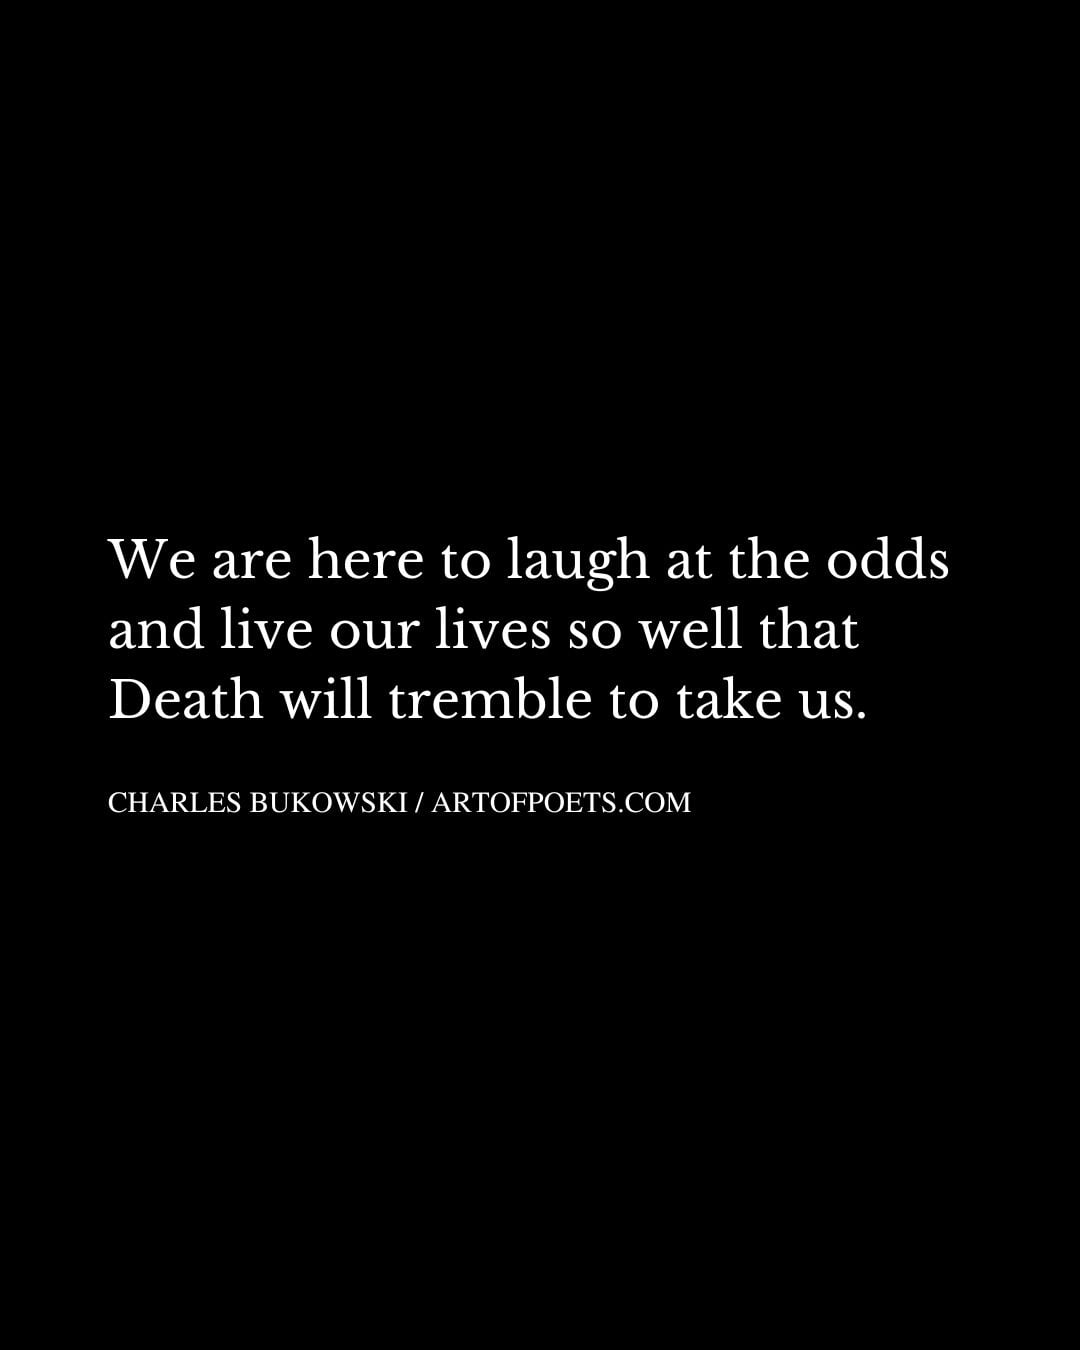 We are here to laugh at the odds and live our lives so well that Death will tremble to take us